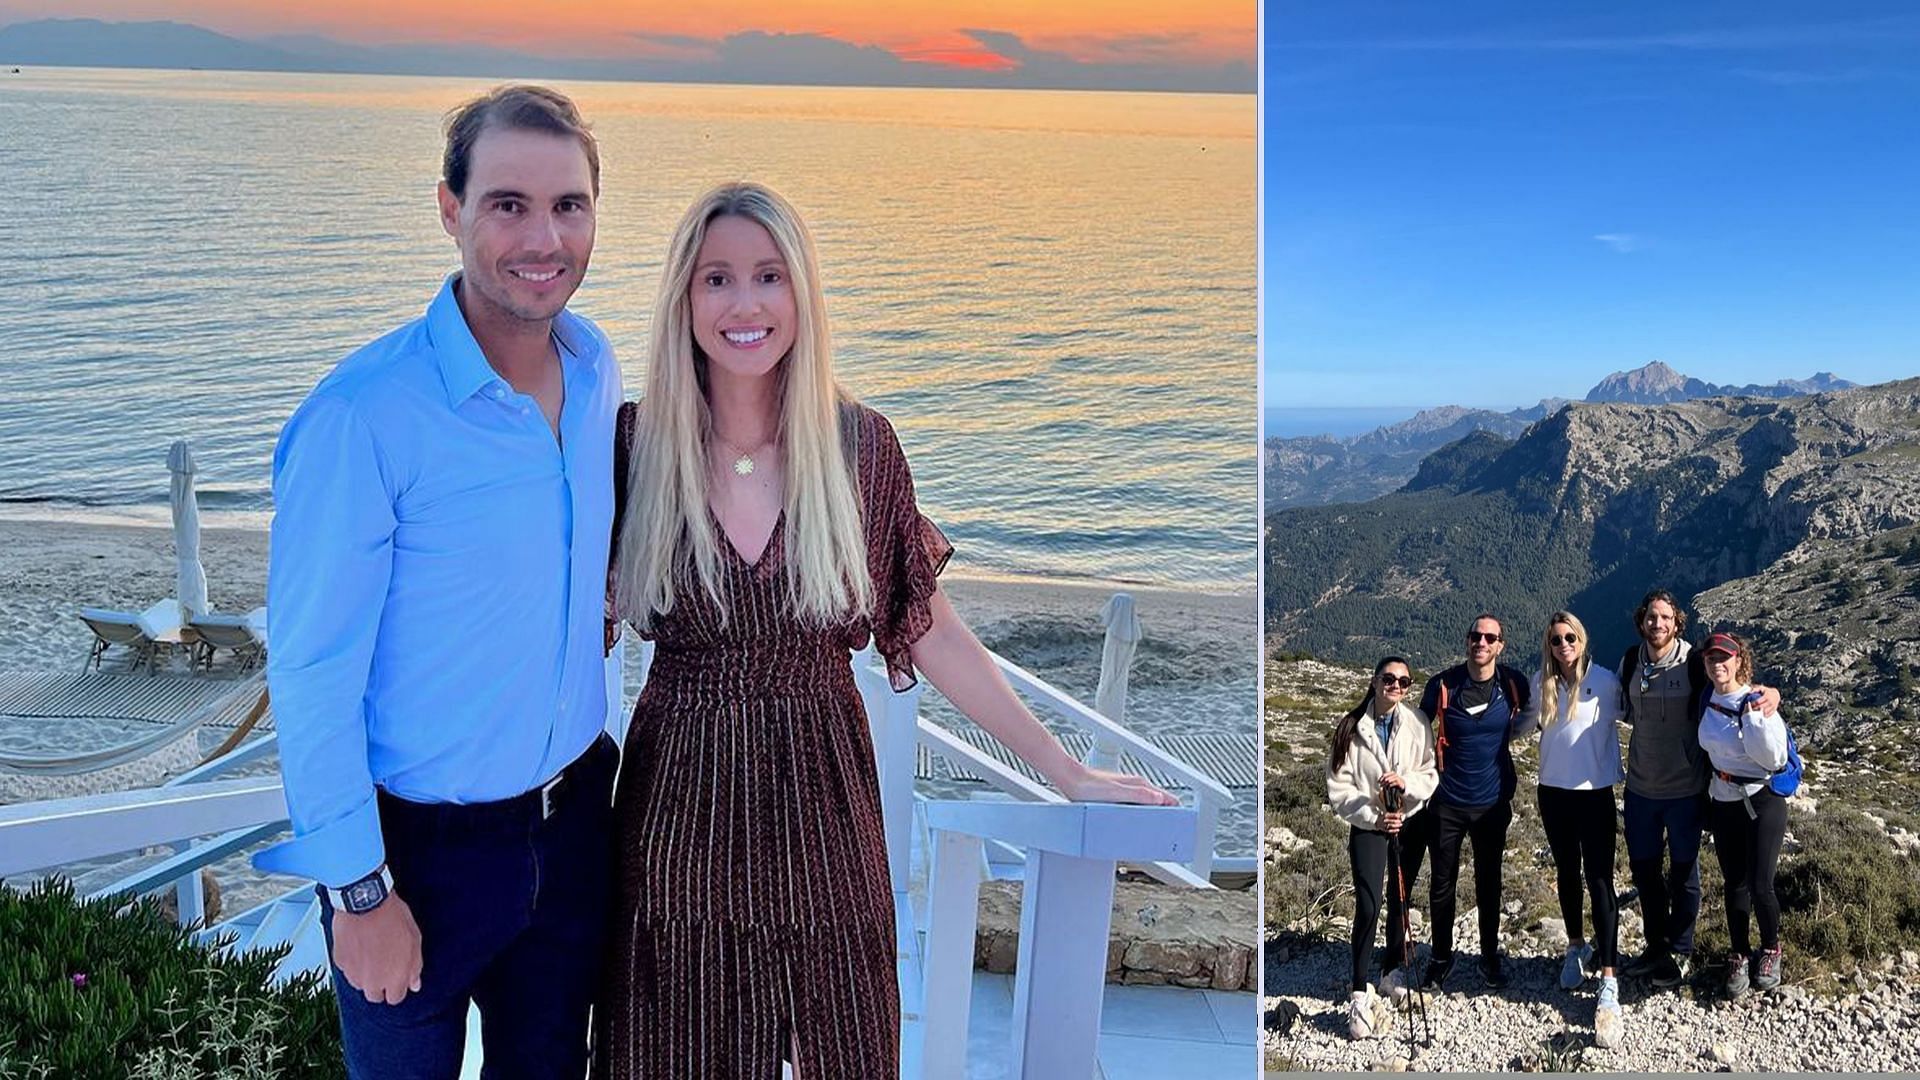 In pictures: Rafael Nadal's sister Maribel goes hiking with friends in Mallorca, takes in the view of the Mediterranean Sea from the mountaintop